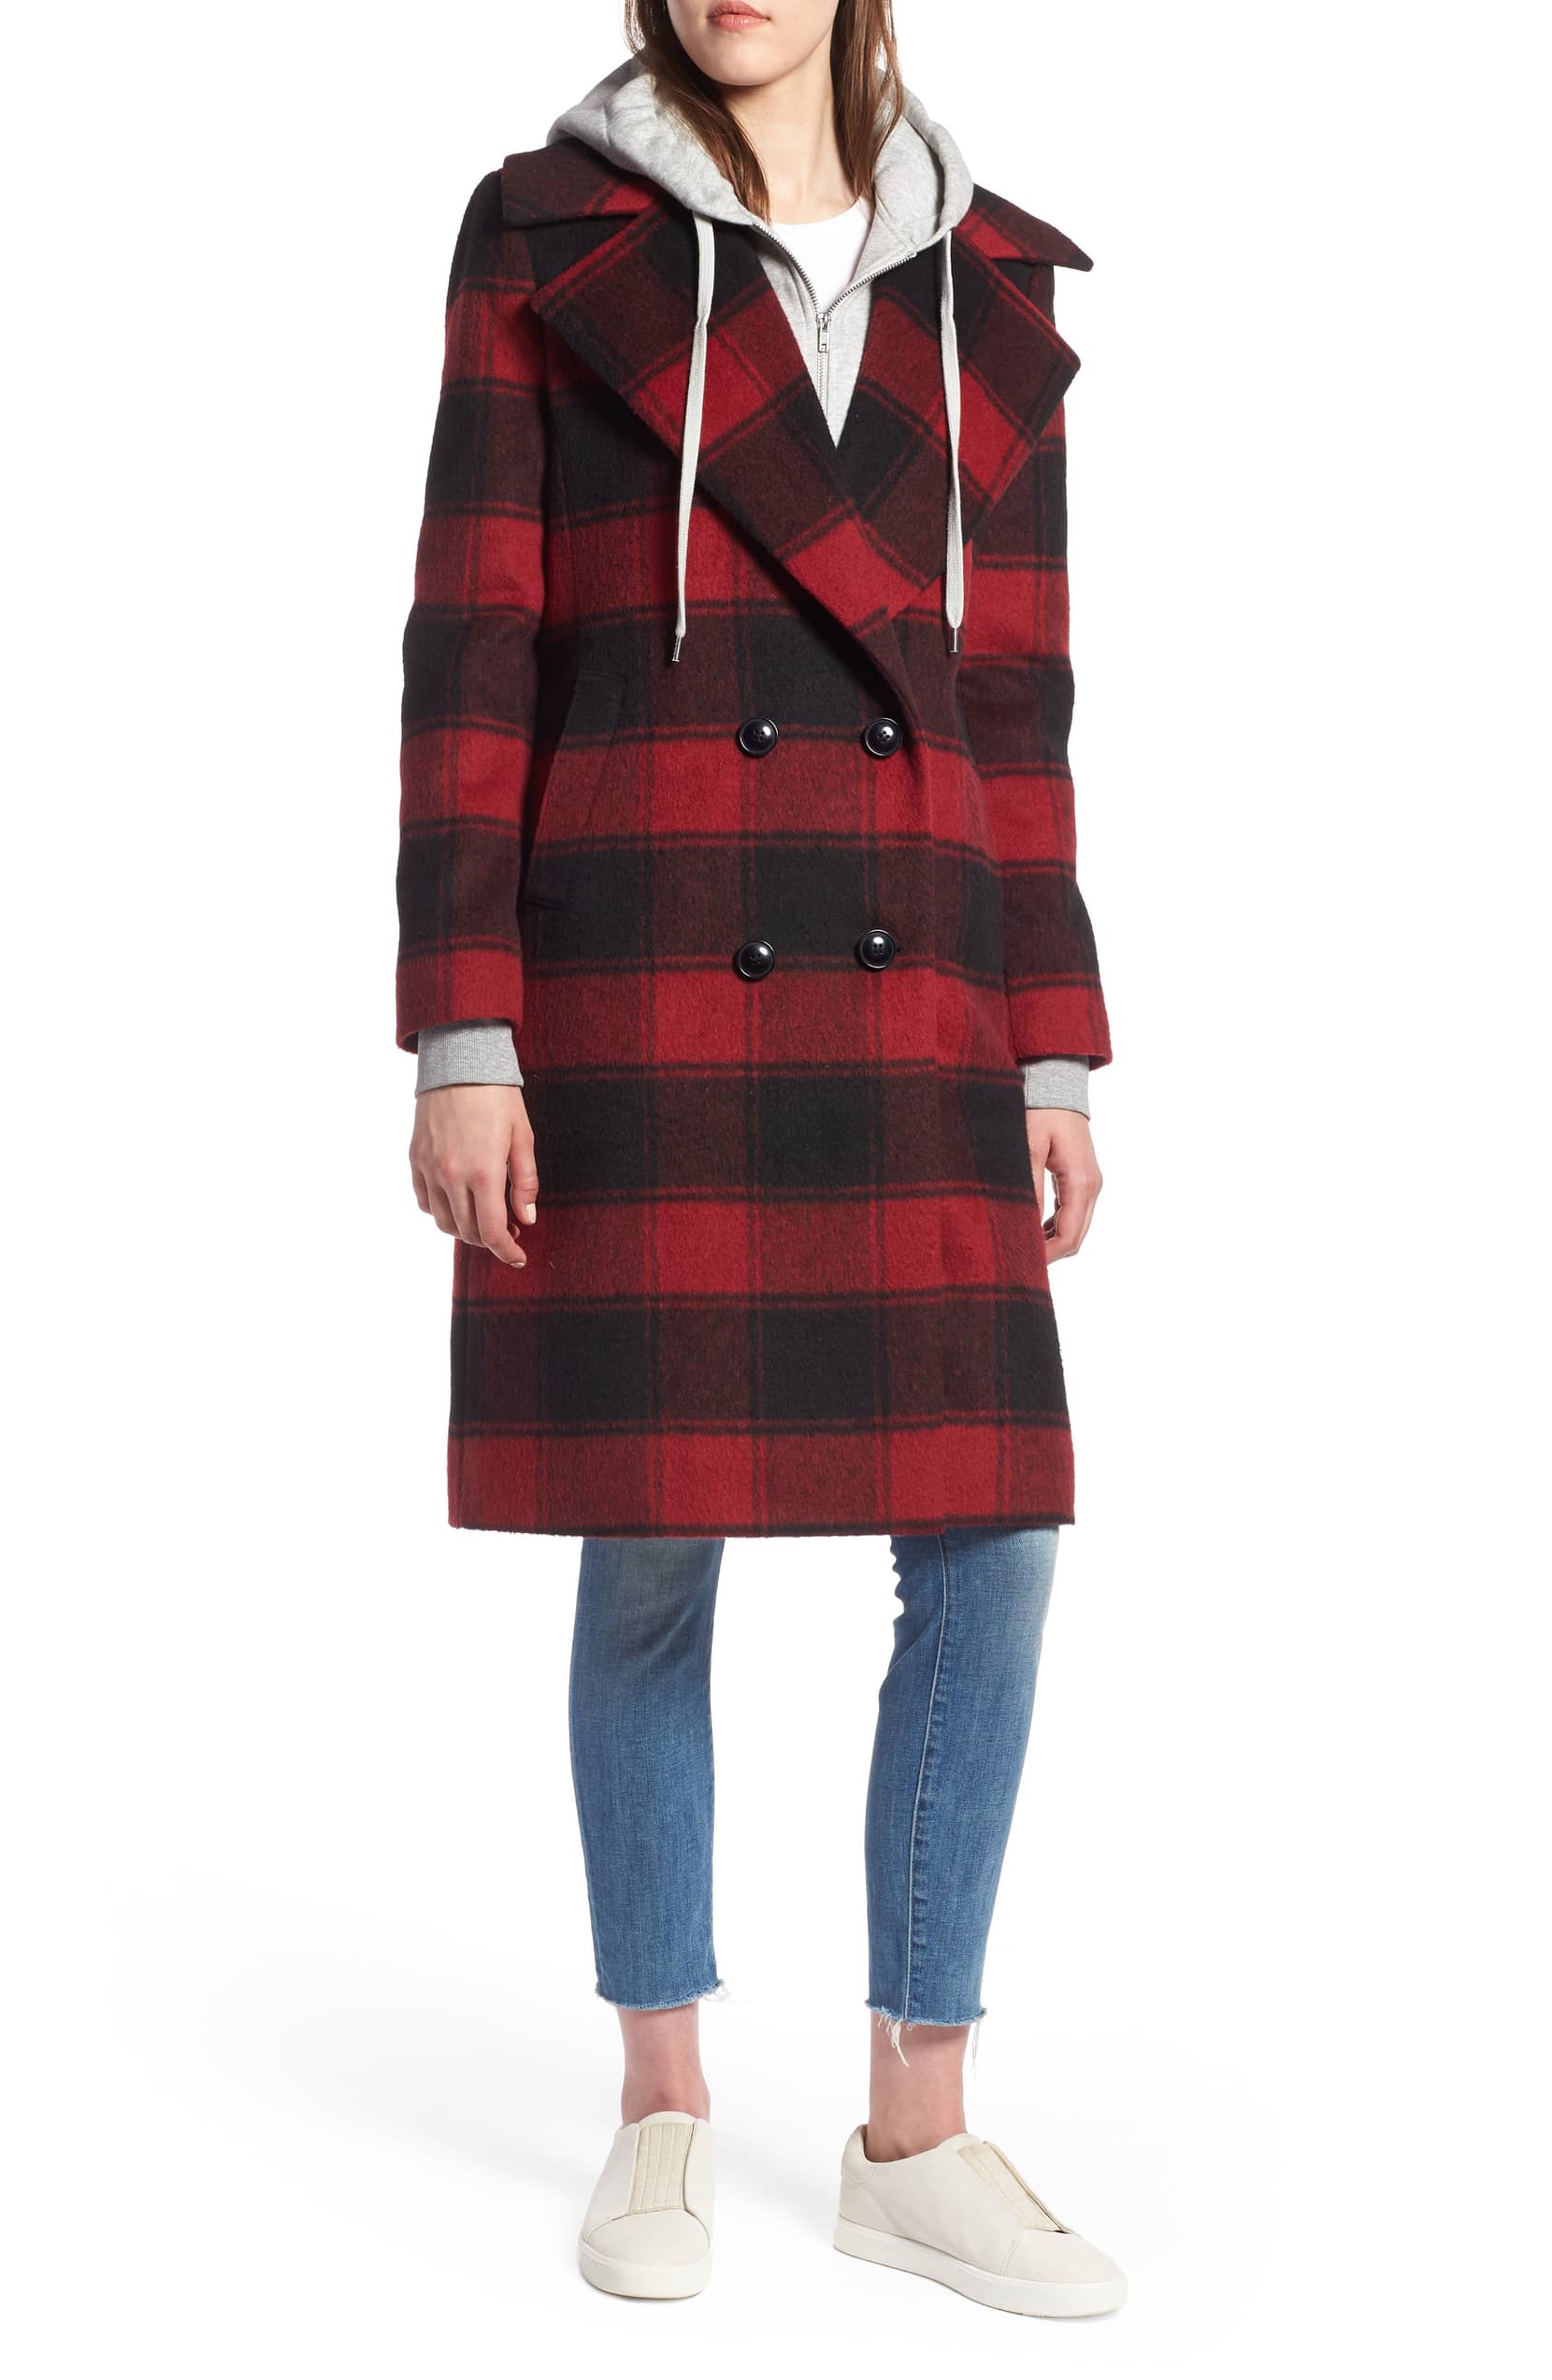 Shop This Pretty Plaid Coat From Kendall and Kylie Jenner's Clothing Line